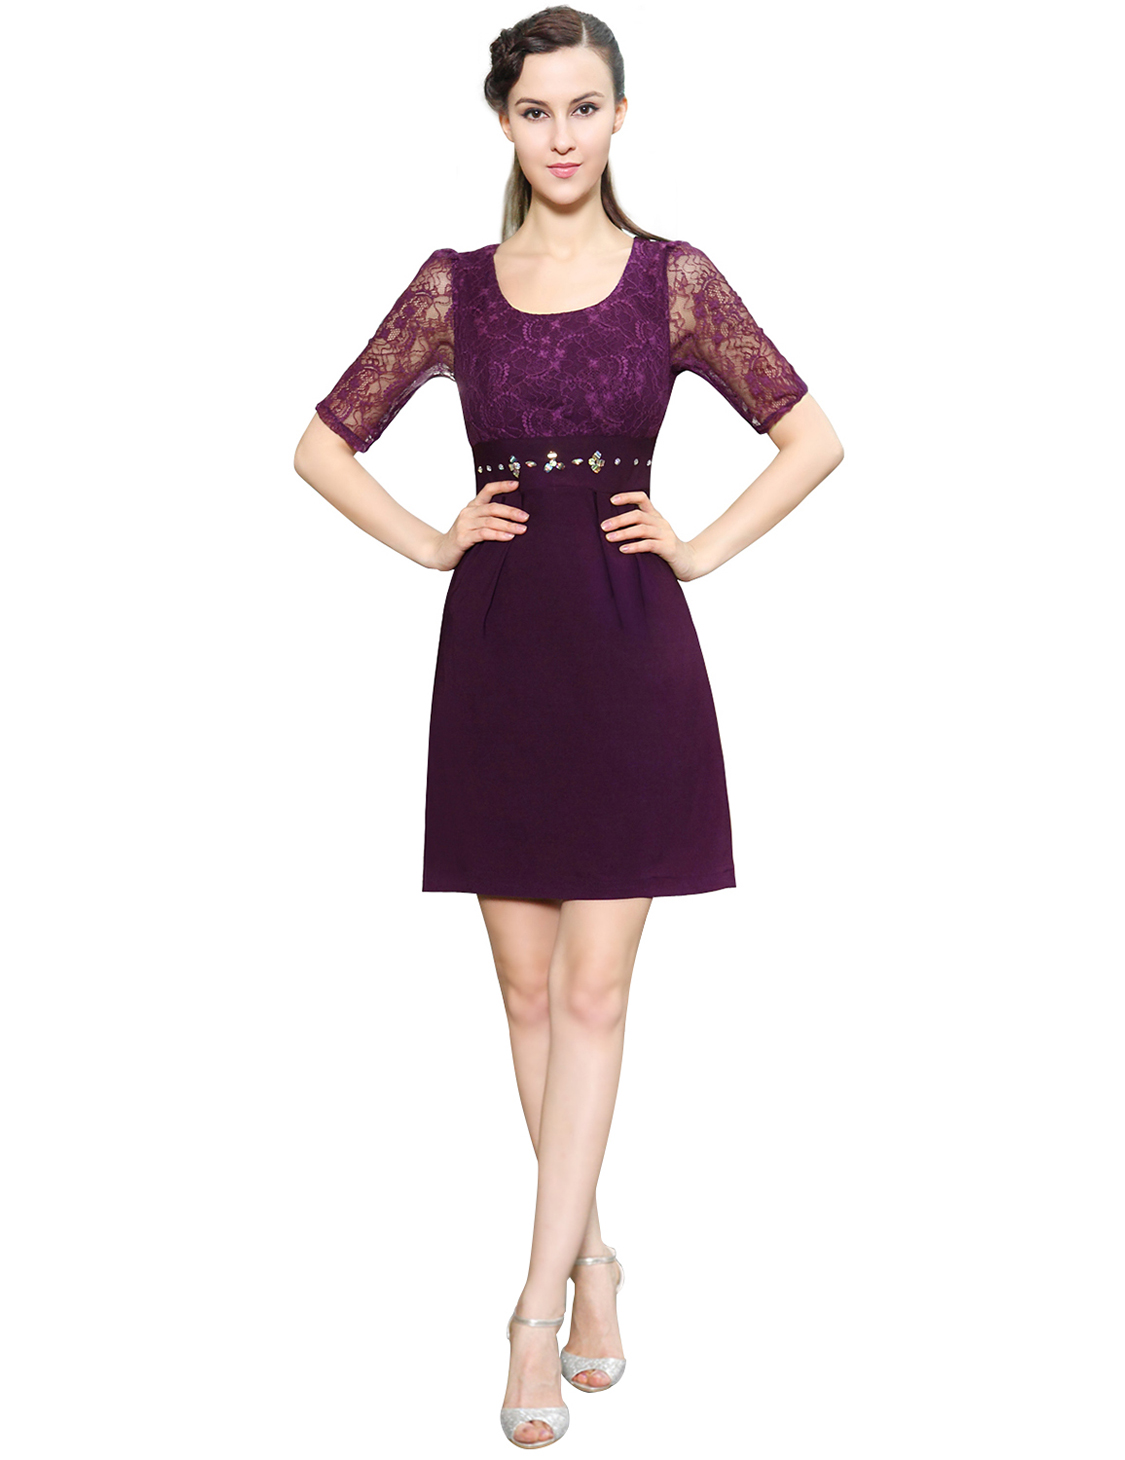 ... -Lace-Purple-Women-Sheath-Cocktail-Casual-Dress-Party-Prom-Gown-03811